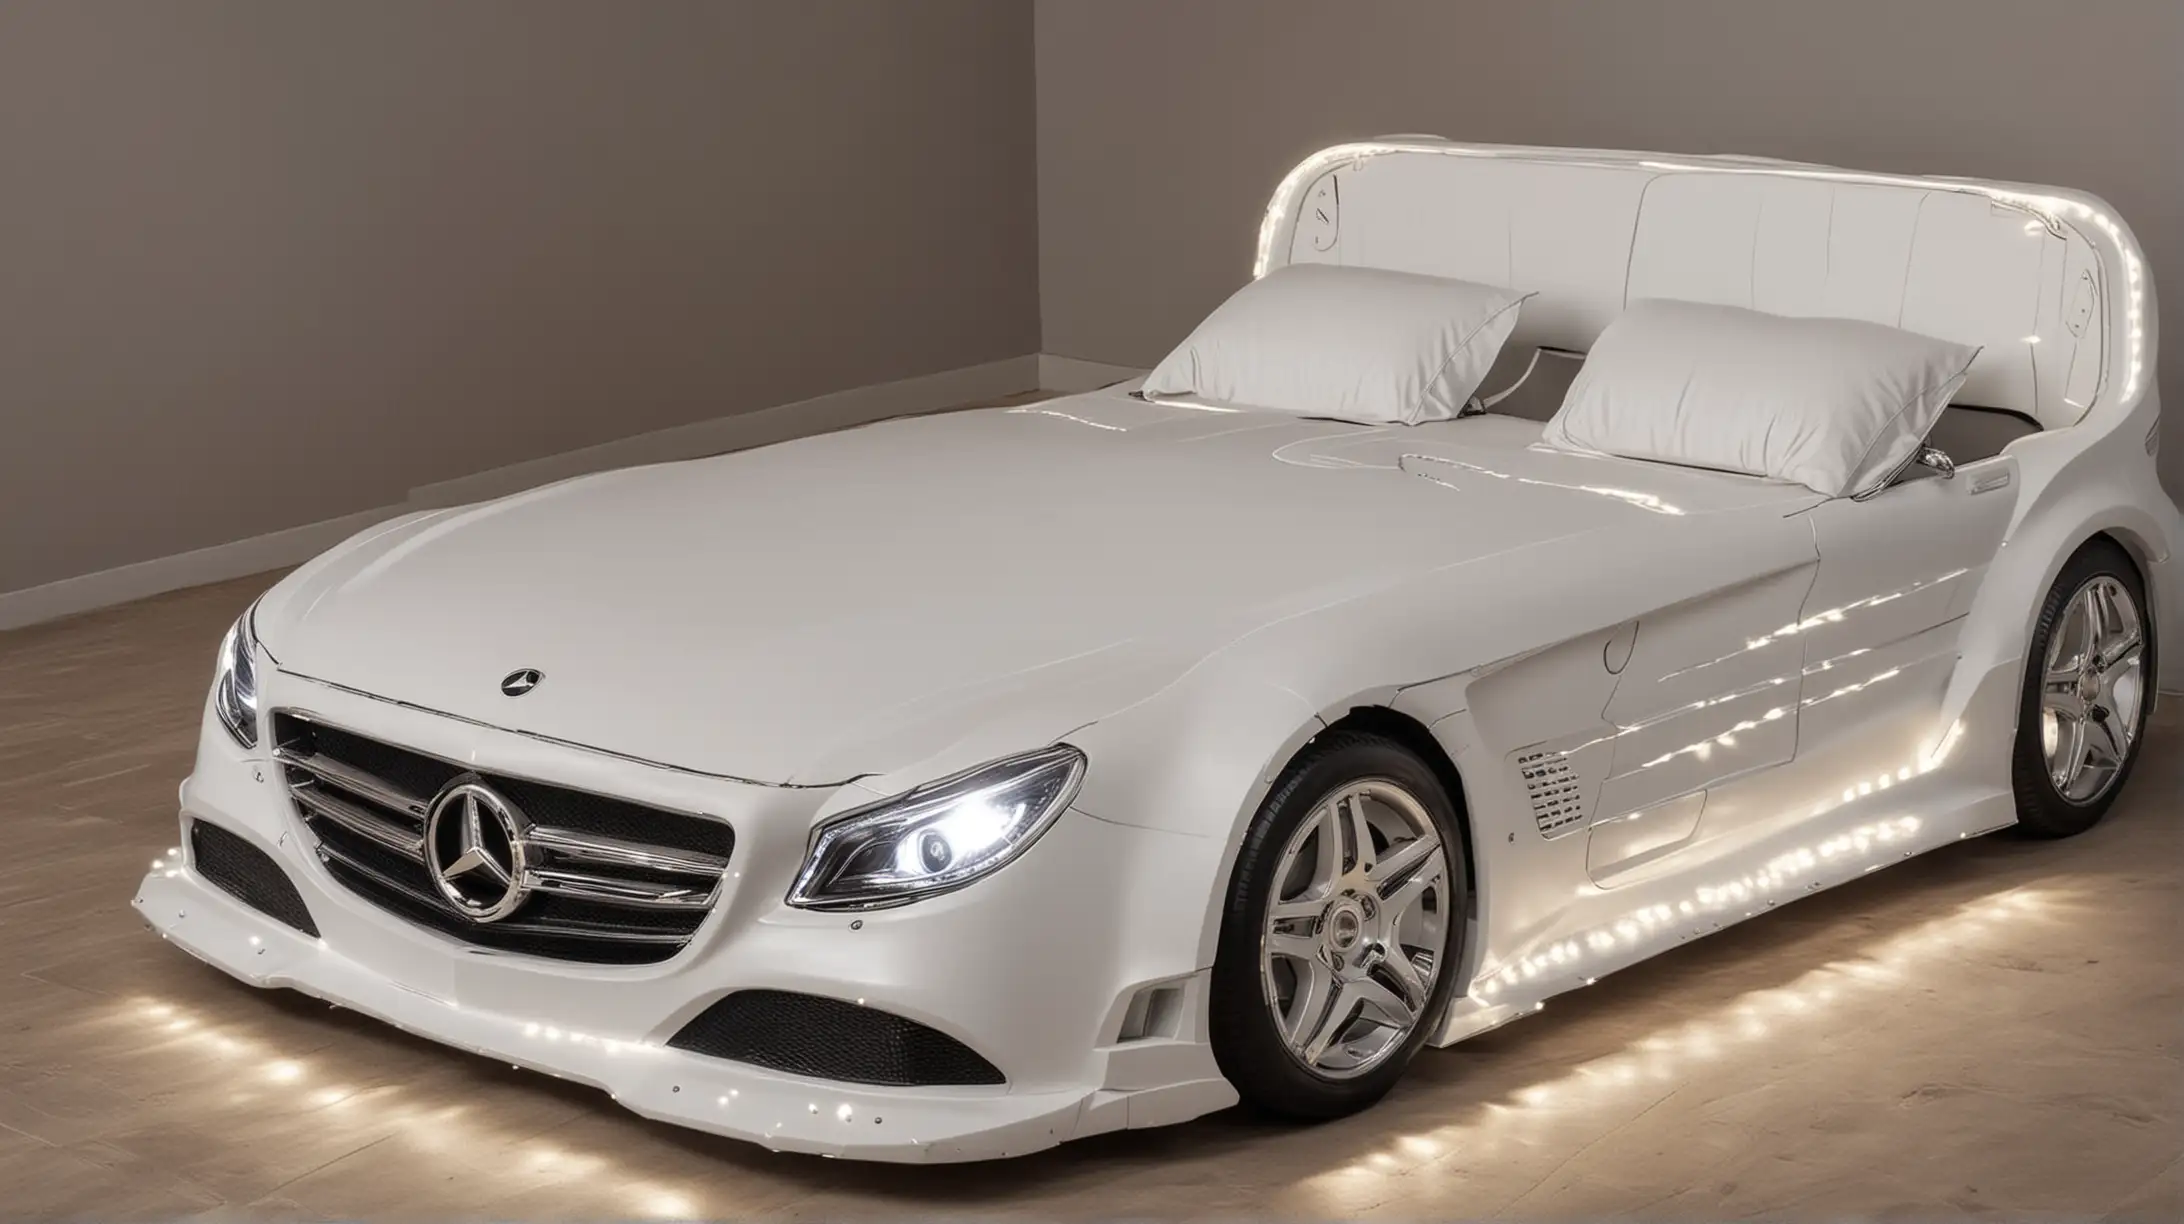 Luxurious Double Bed Shaped as a Mercedes Car with Illuminated Headlights